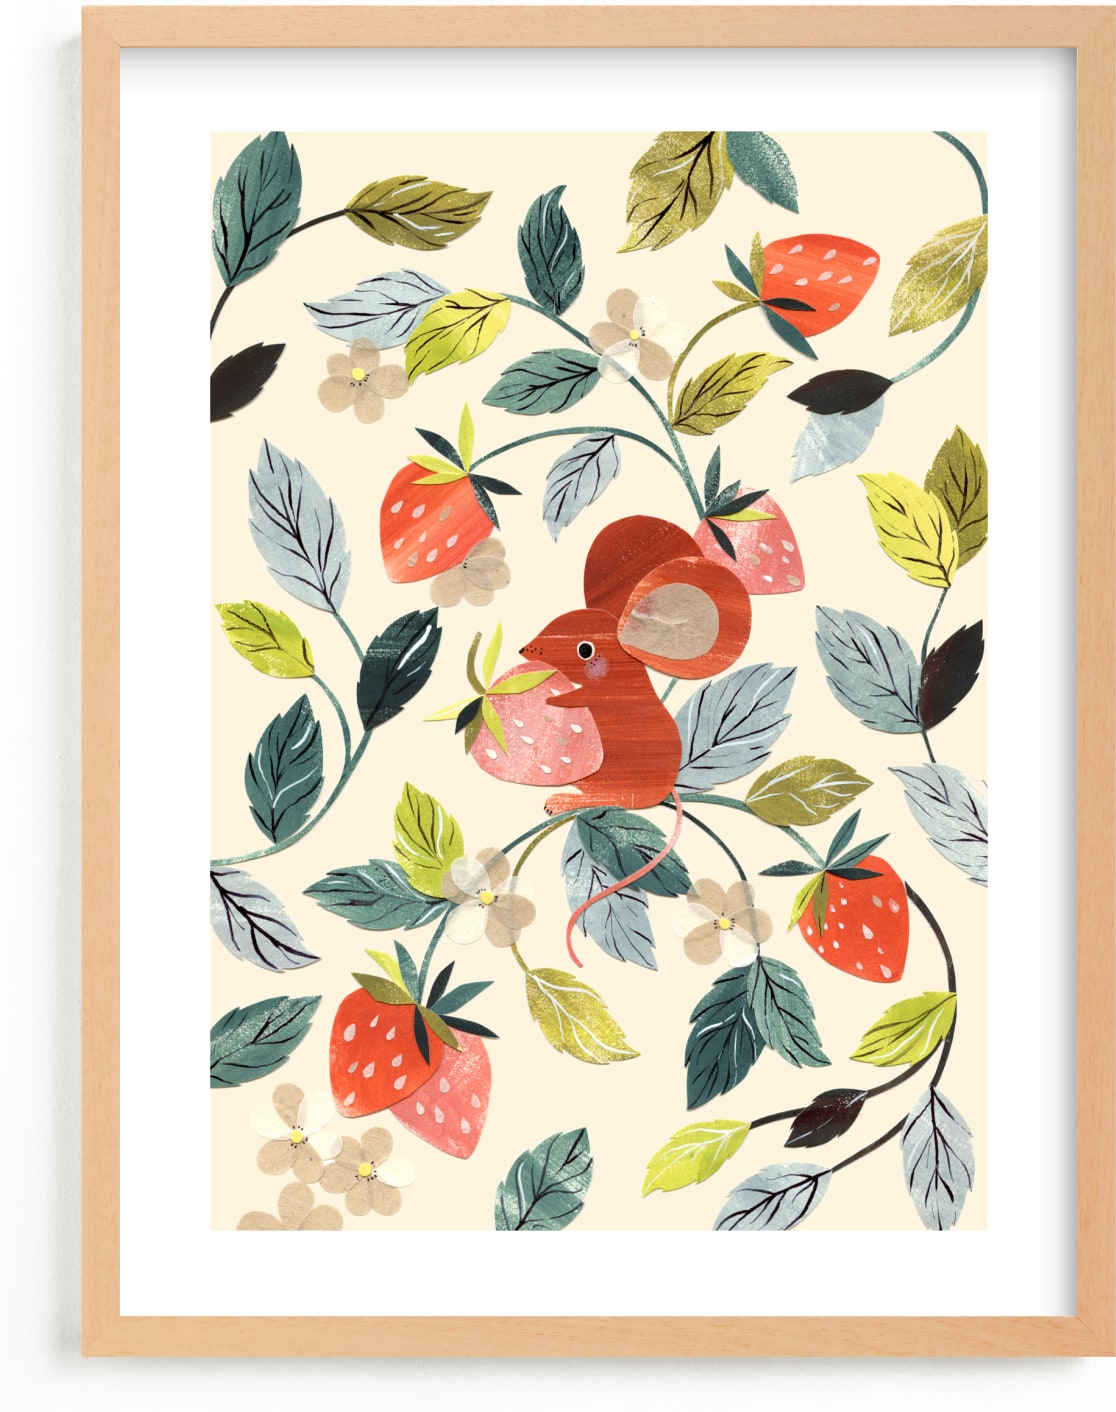 This is a colorful kids wall art by Sarah Knight called Strawberry Thief.